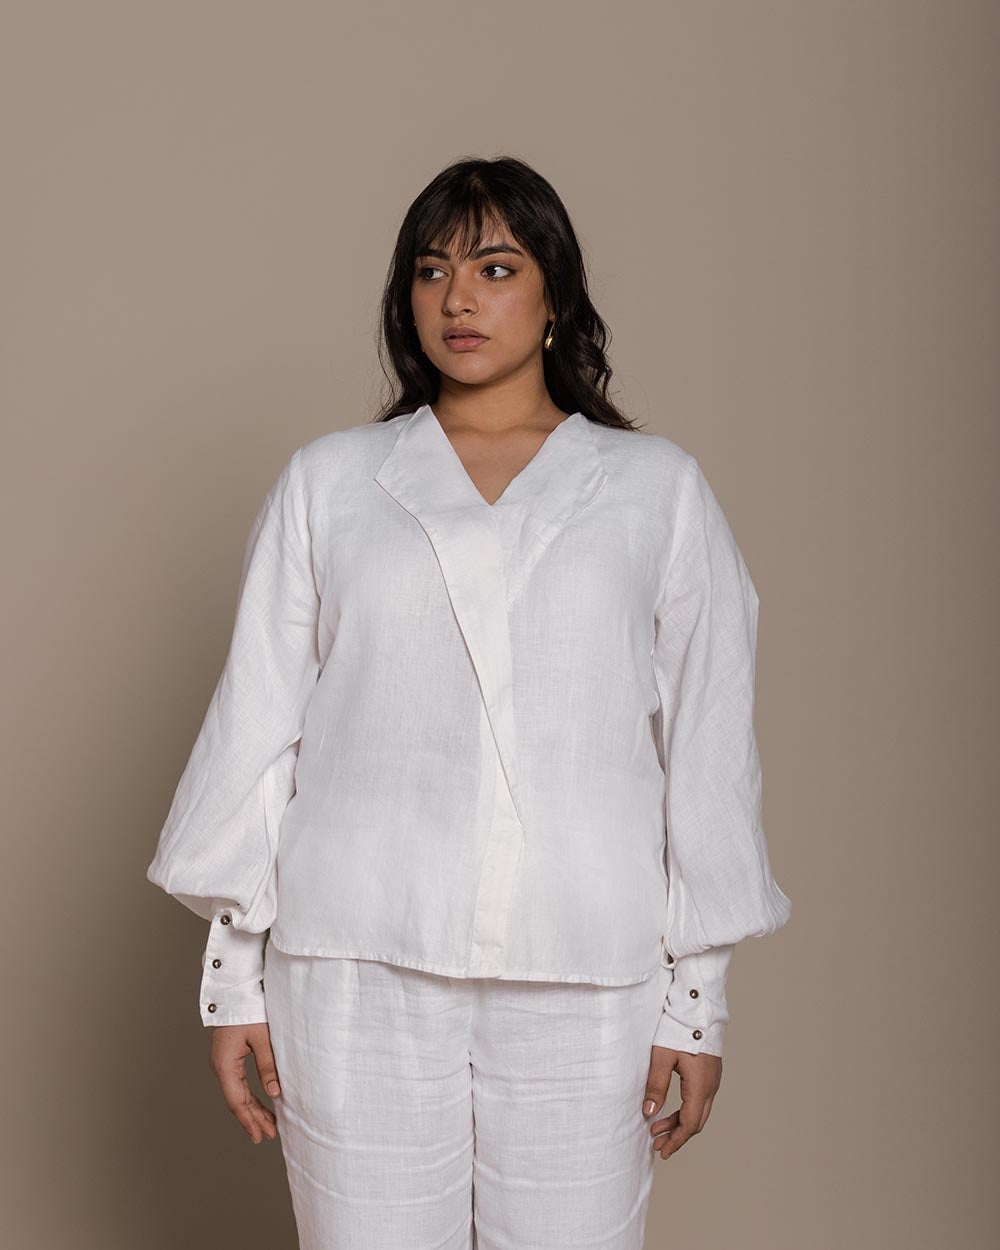 Poems In The Sky Top - Coconut White at Kamakhyaa by Reistor. This item is Blouses, Casual Wear, For Mother, For Mother W, Hemp, Natural, Office Wear, Relaxed Fit, Solids, Tops, White, Womenswear